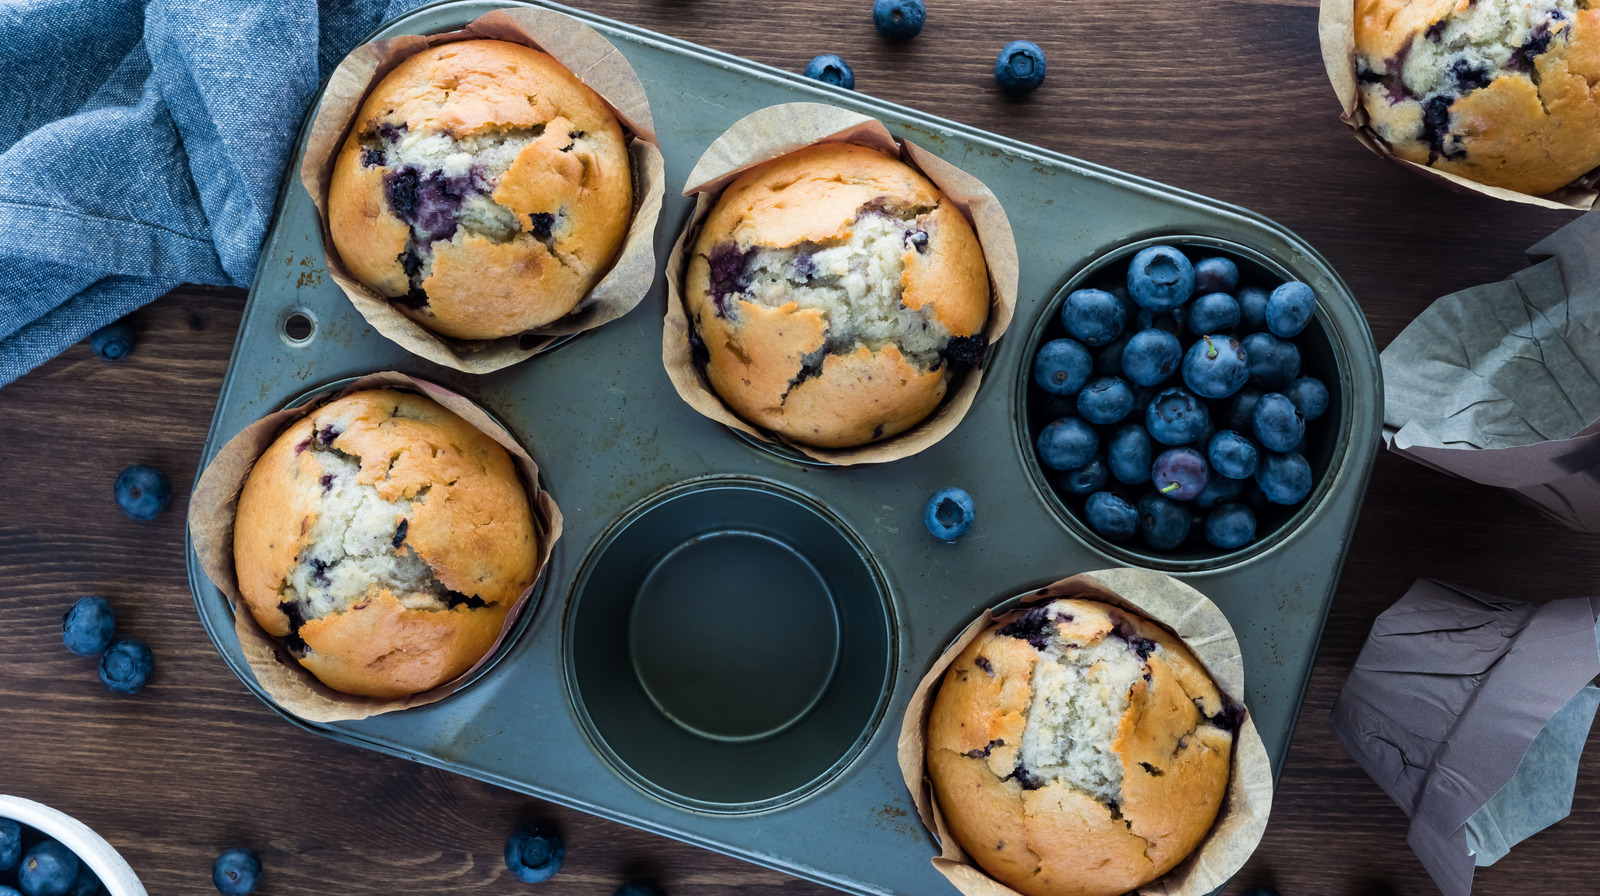 https://www.tastingtable.com/img/gallery/the-absolute-best-uses-for-your-muffin-tin/l-intro-1654618419.jpg